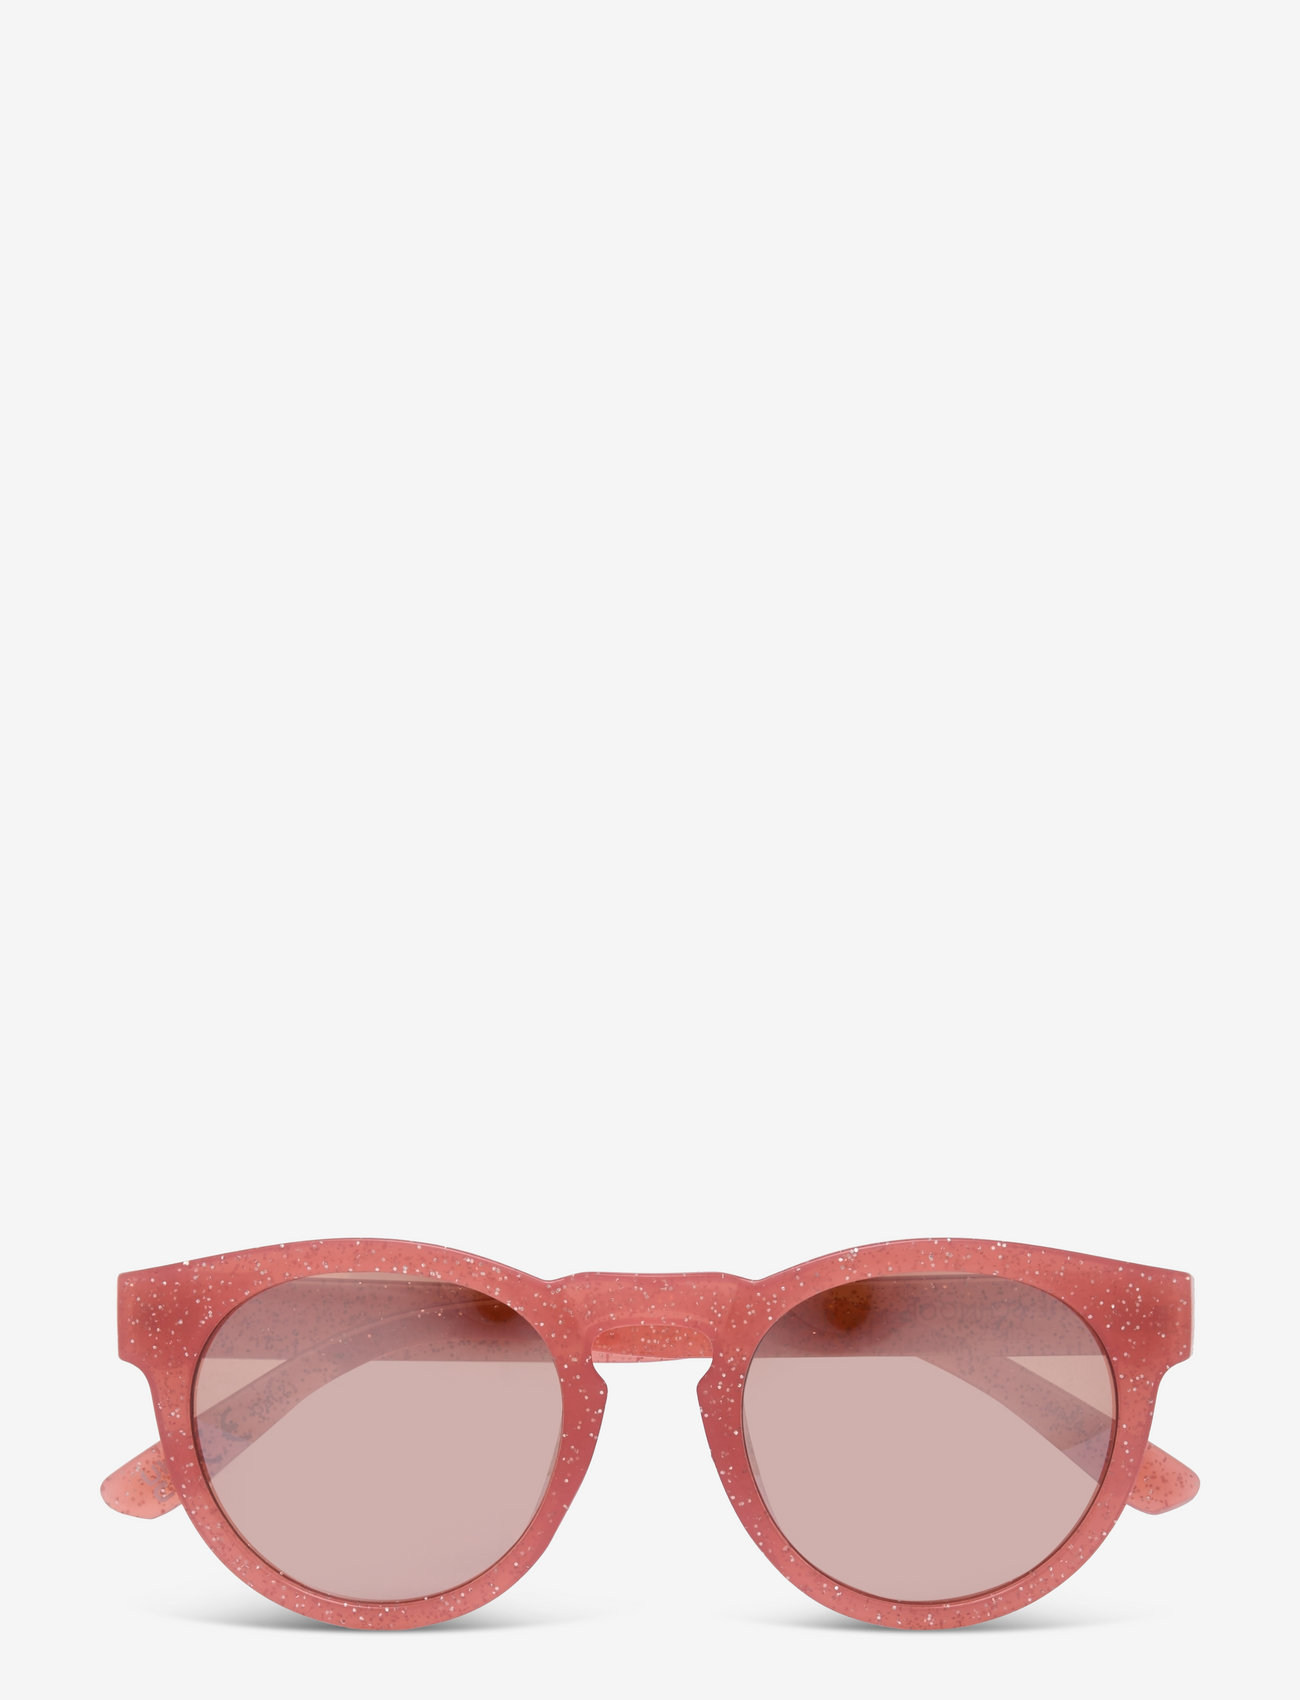 Sofie Schnoor Young - Sunglasses - sommarfynd - rose - 0